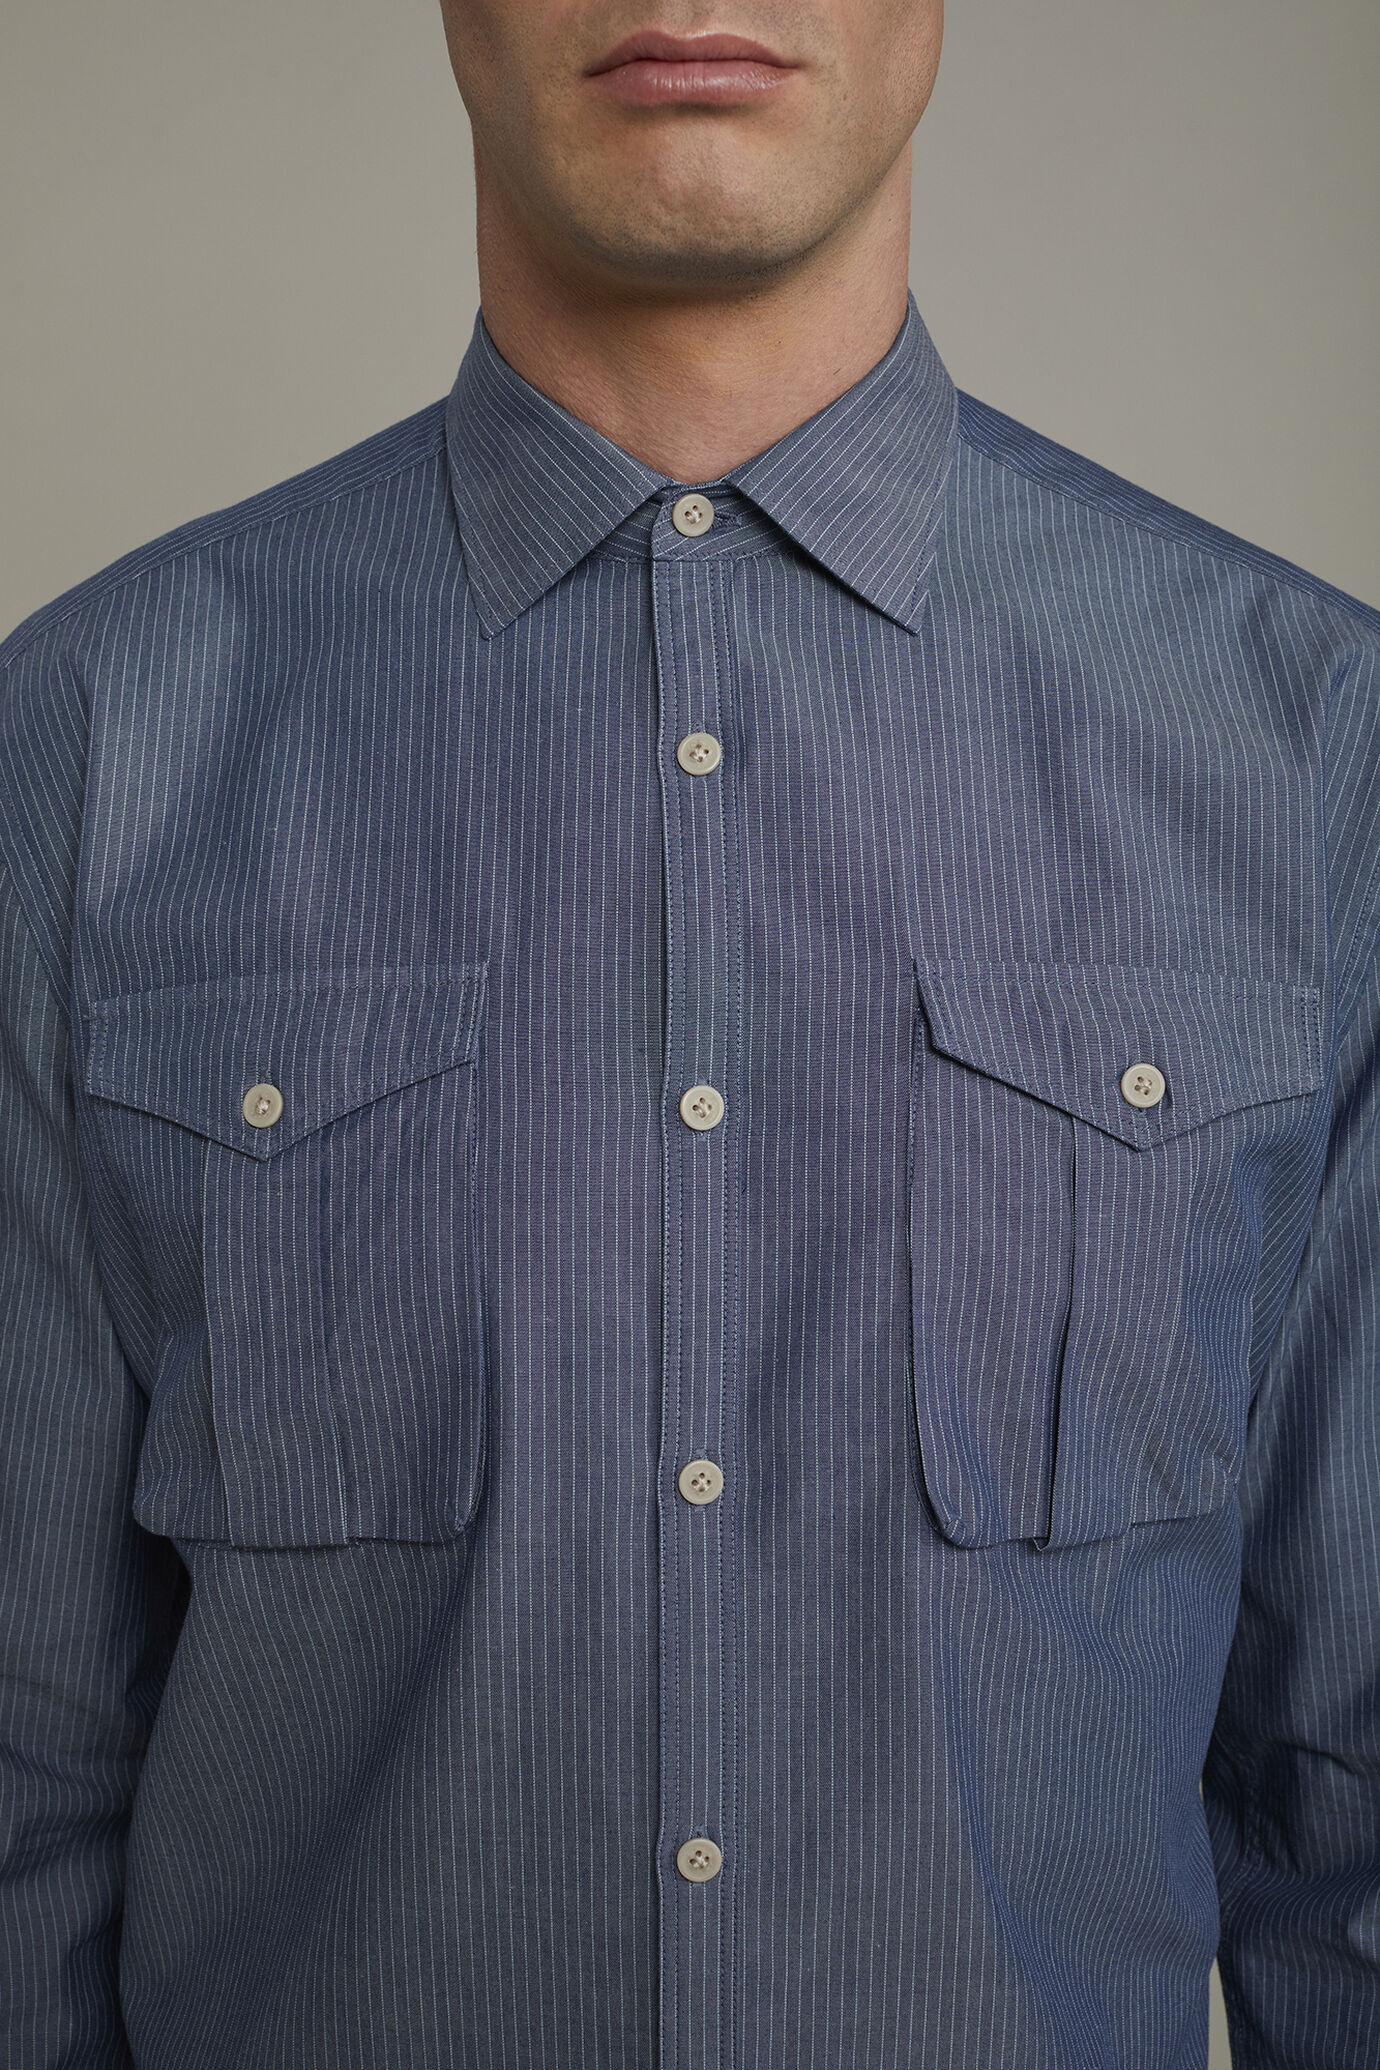 Men’s casual shirt with classic collar 100% cotton pinstriped fabric in denim comfort fit image number 3